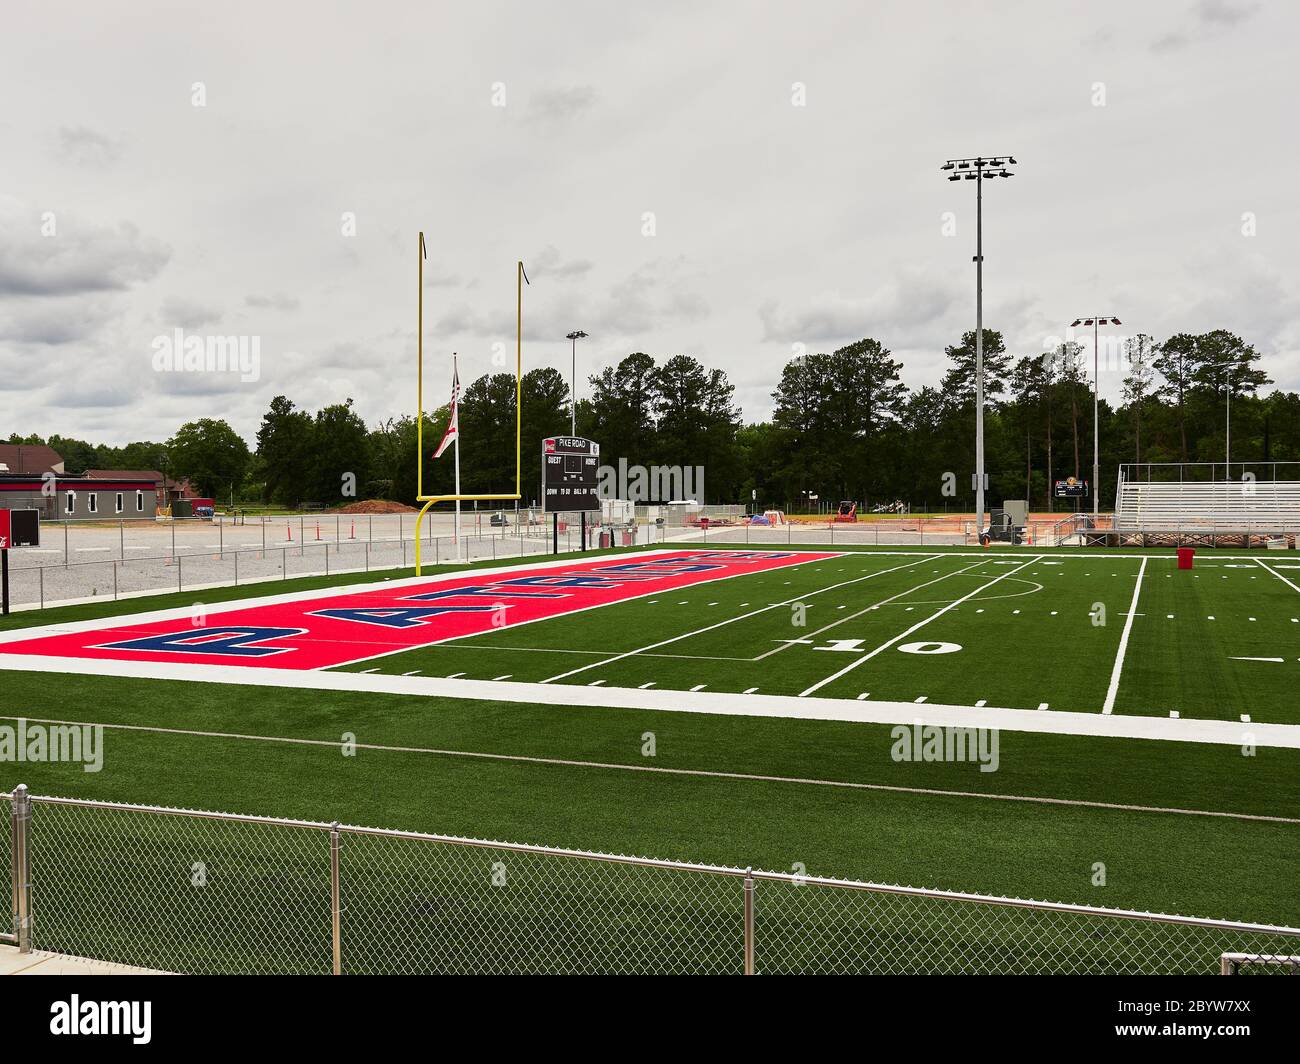 New colorful artificial turf at the end zone and goal post of a high school football field in Pike Road Alabama, USA. Stock Photo